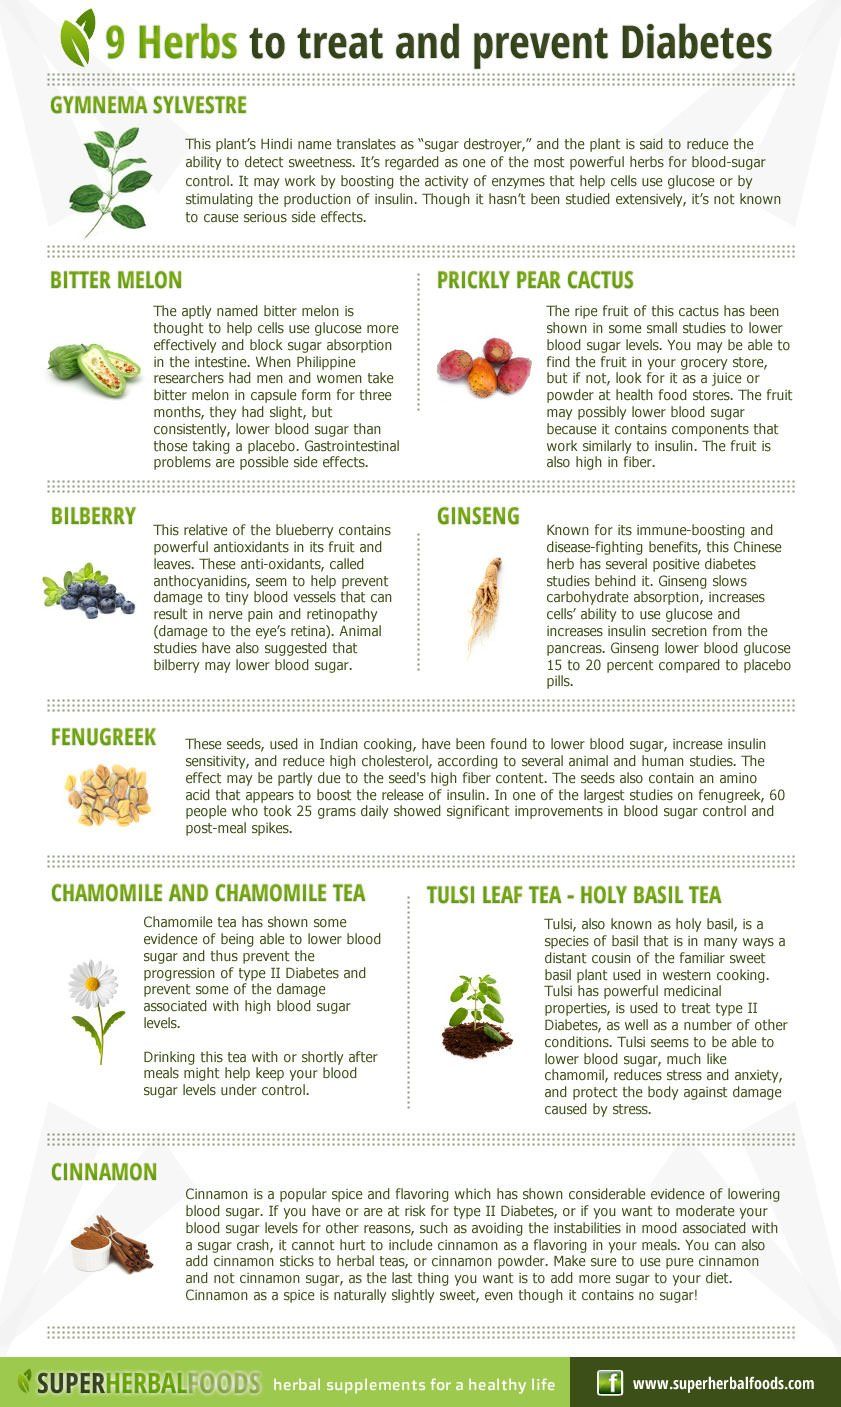 9 Herbs To Treat And Prevent Diabetes Infographic